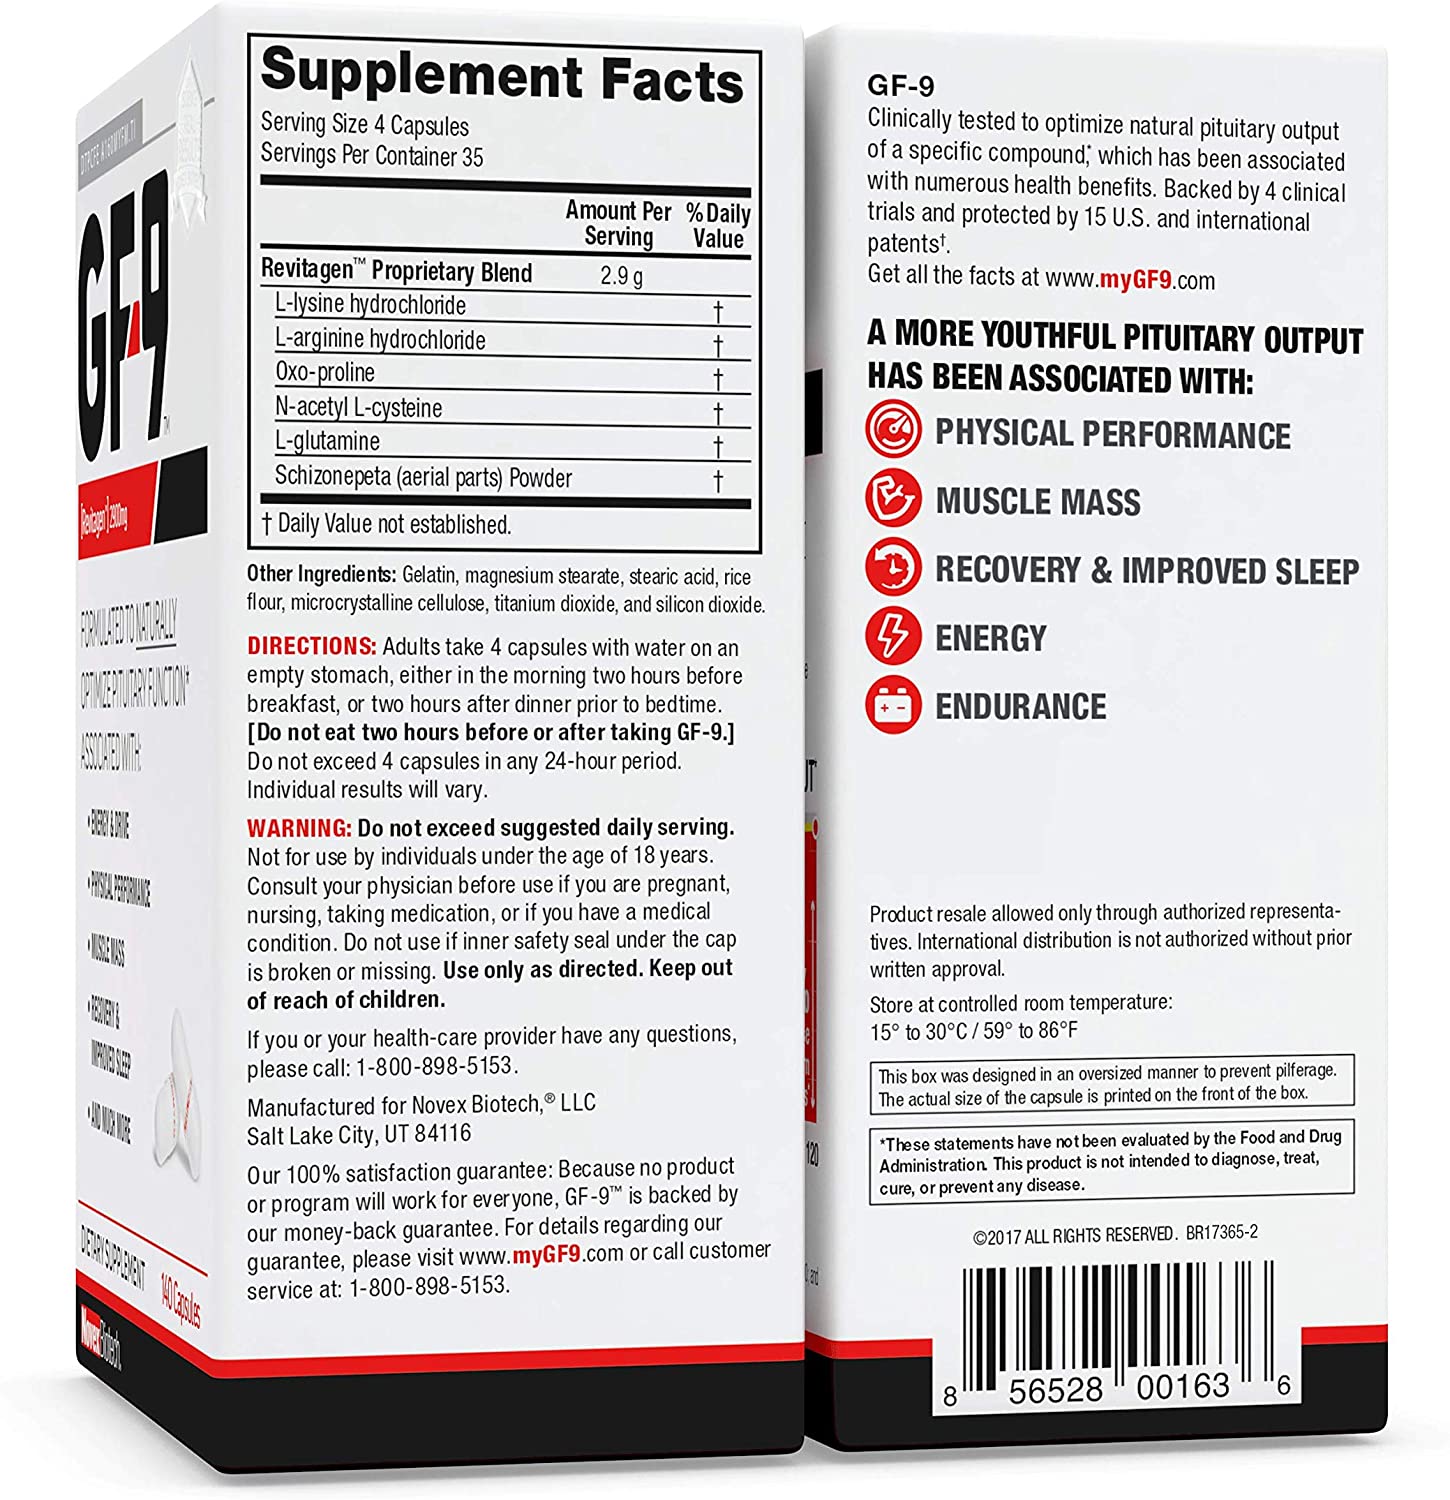 Growth factor 9 ingredients and supplement facts